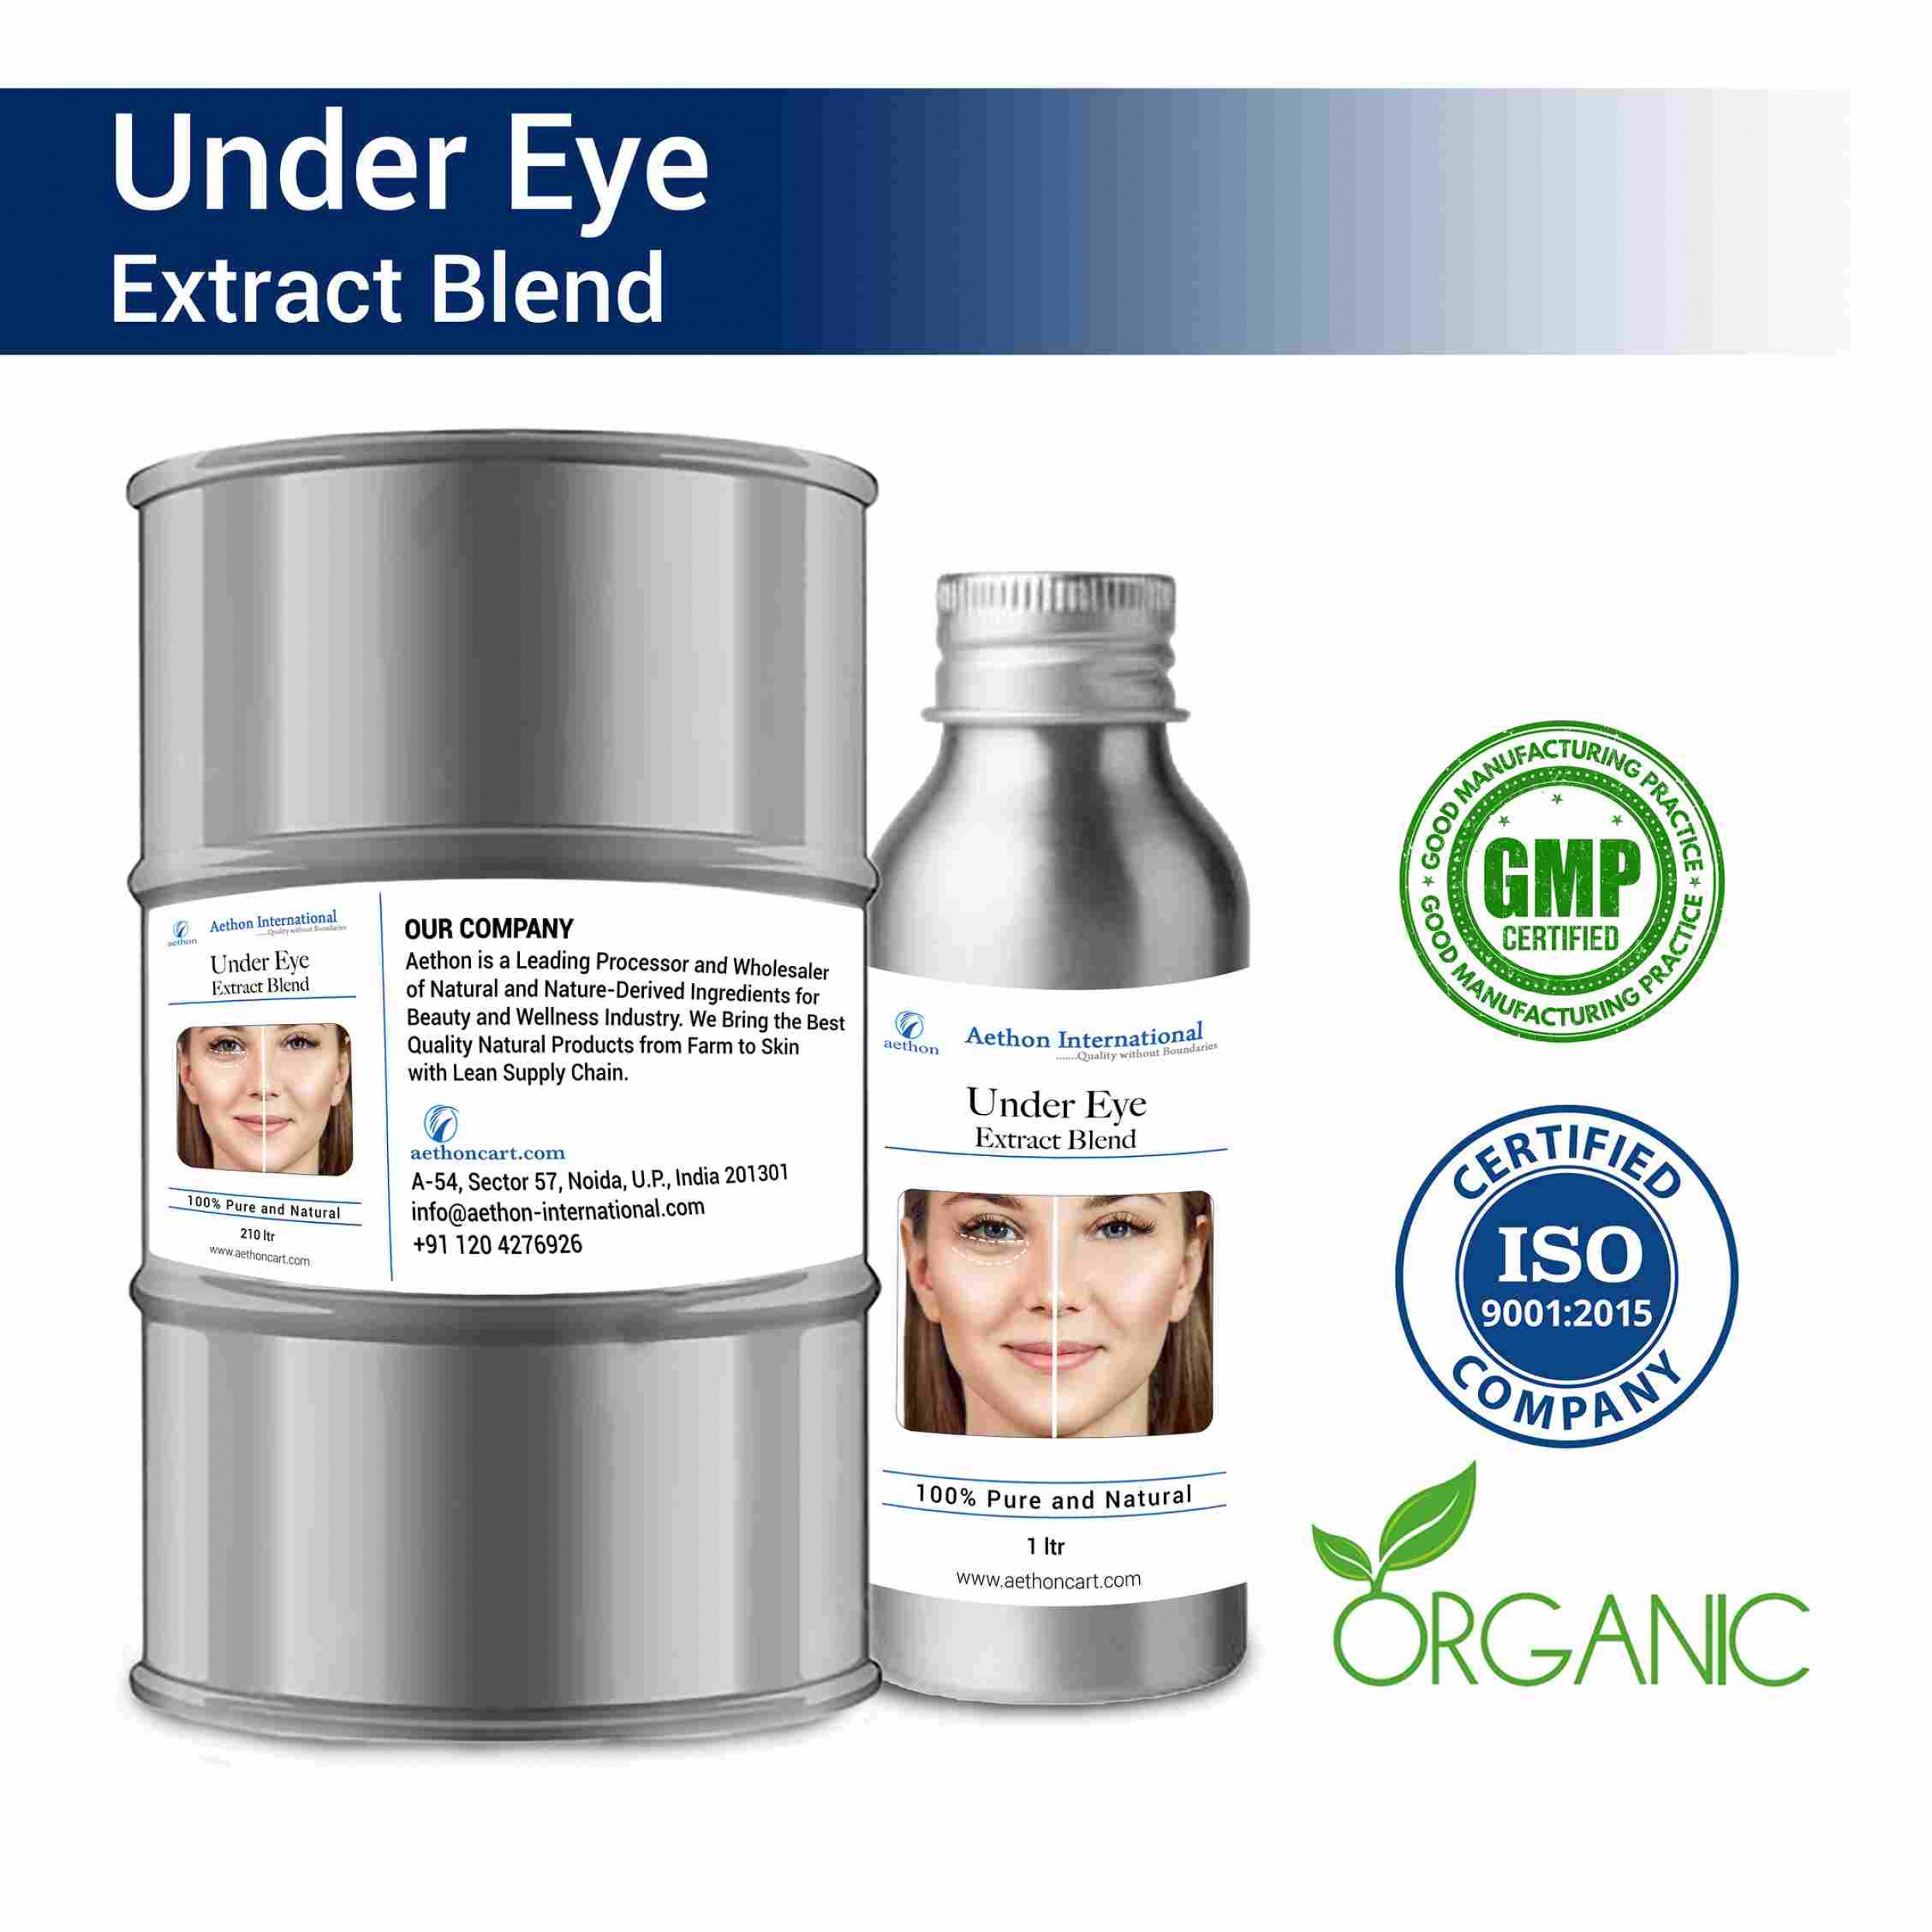 Under Eye Extract Blend (Oil)